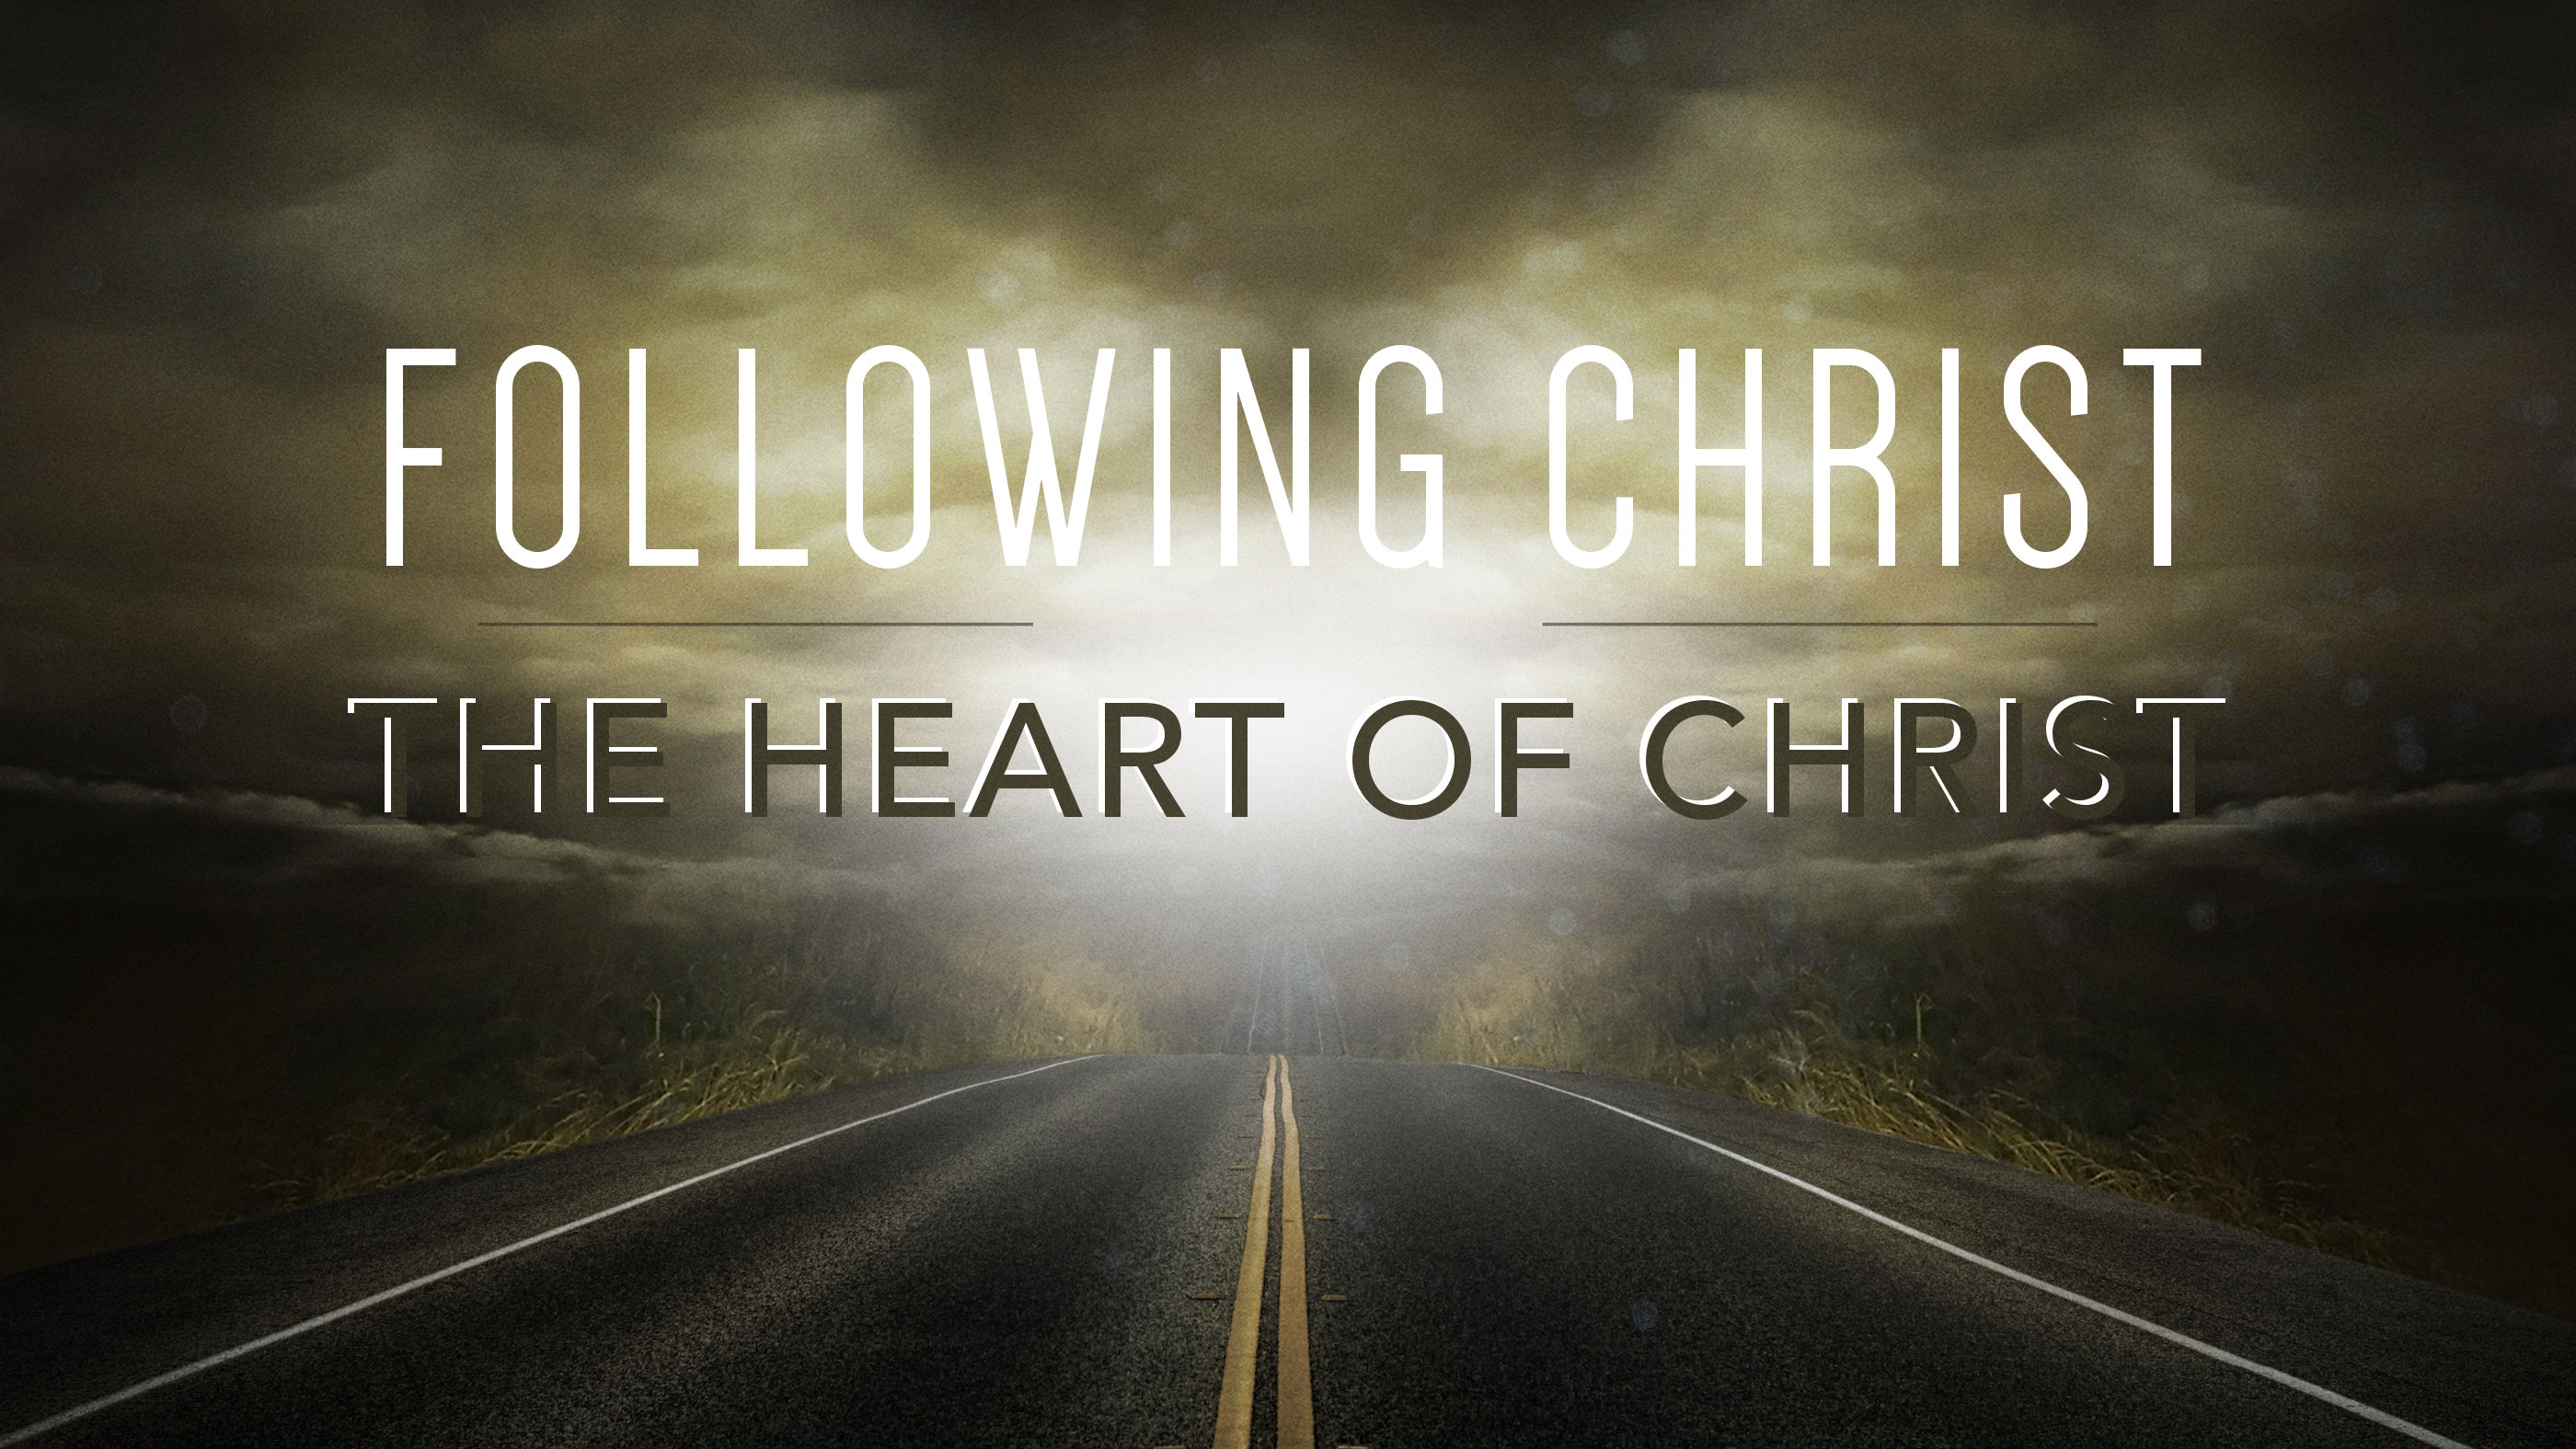 Following Christ - The Heart of Christ